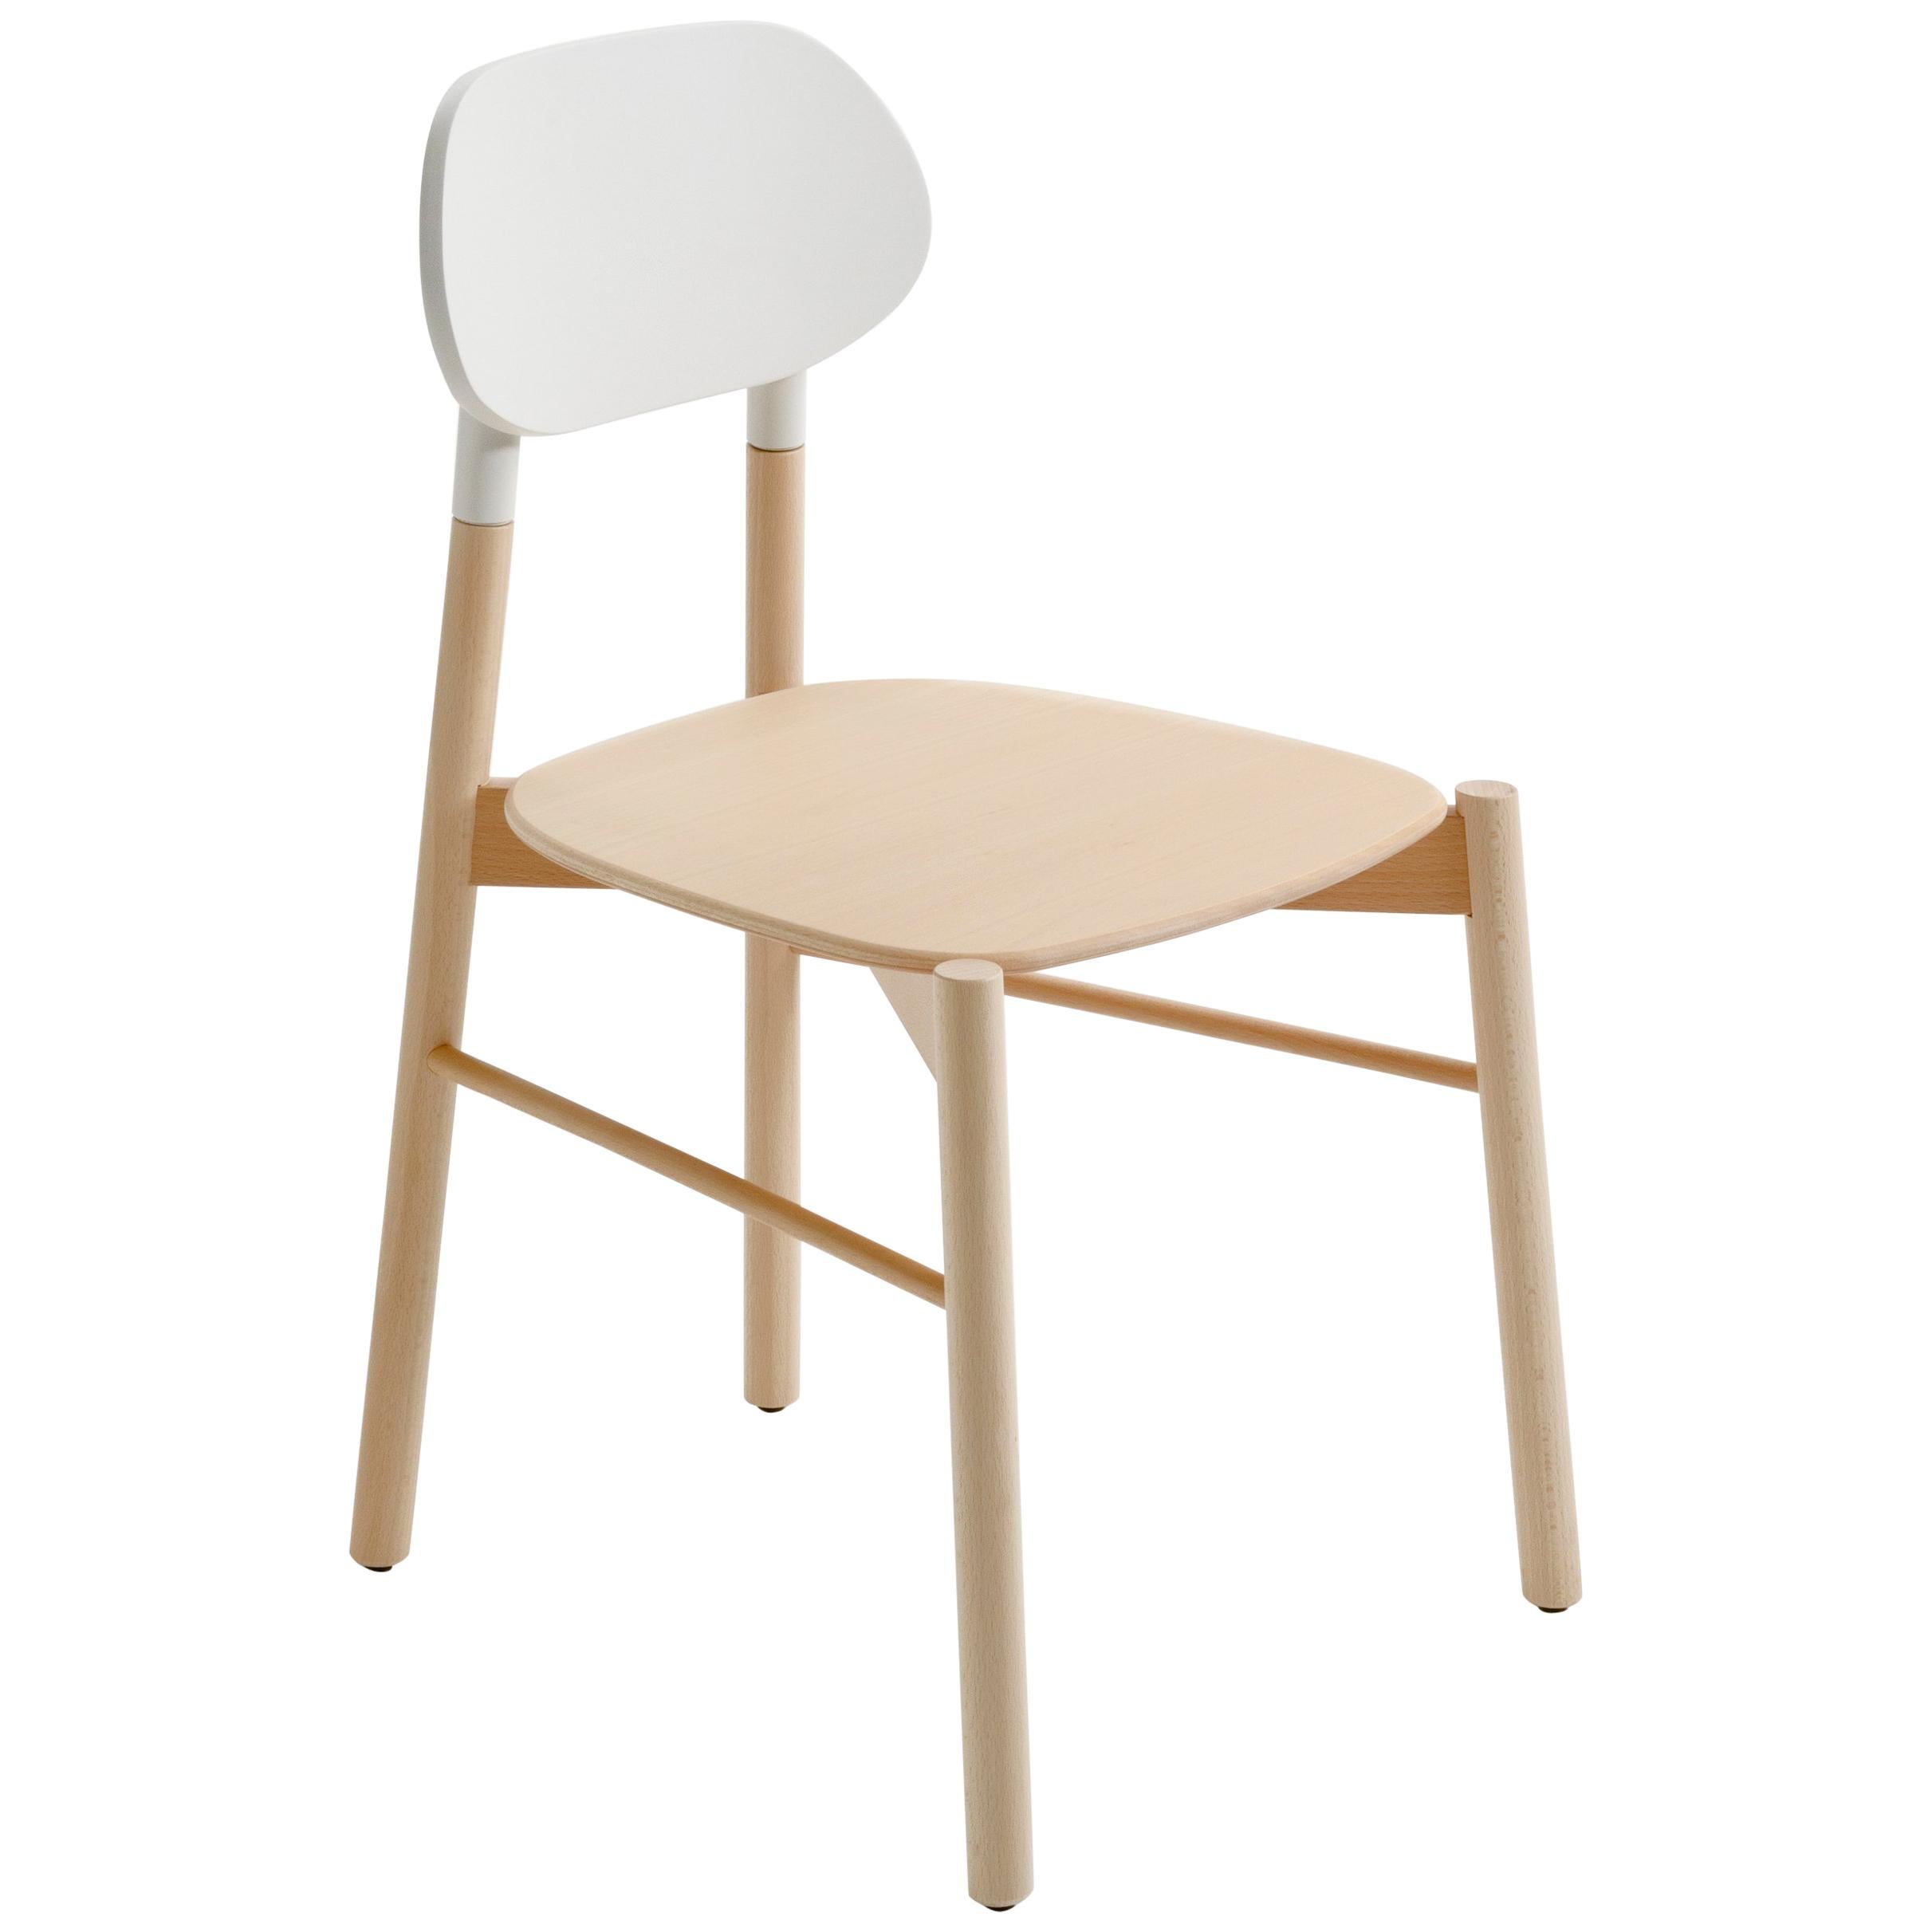 Bokken Chair, Beech Structure White Back, Minimalist Design in Nordic Style